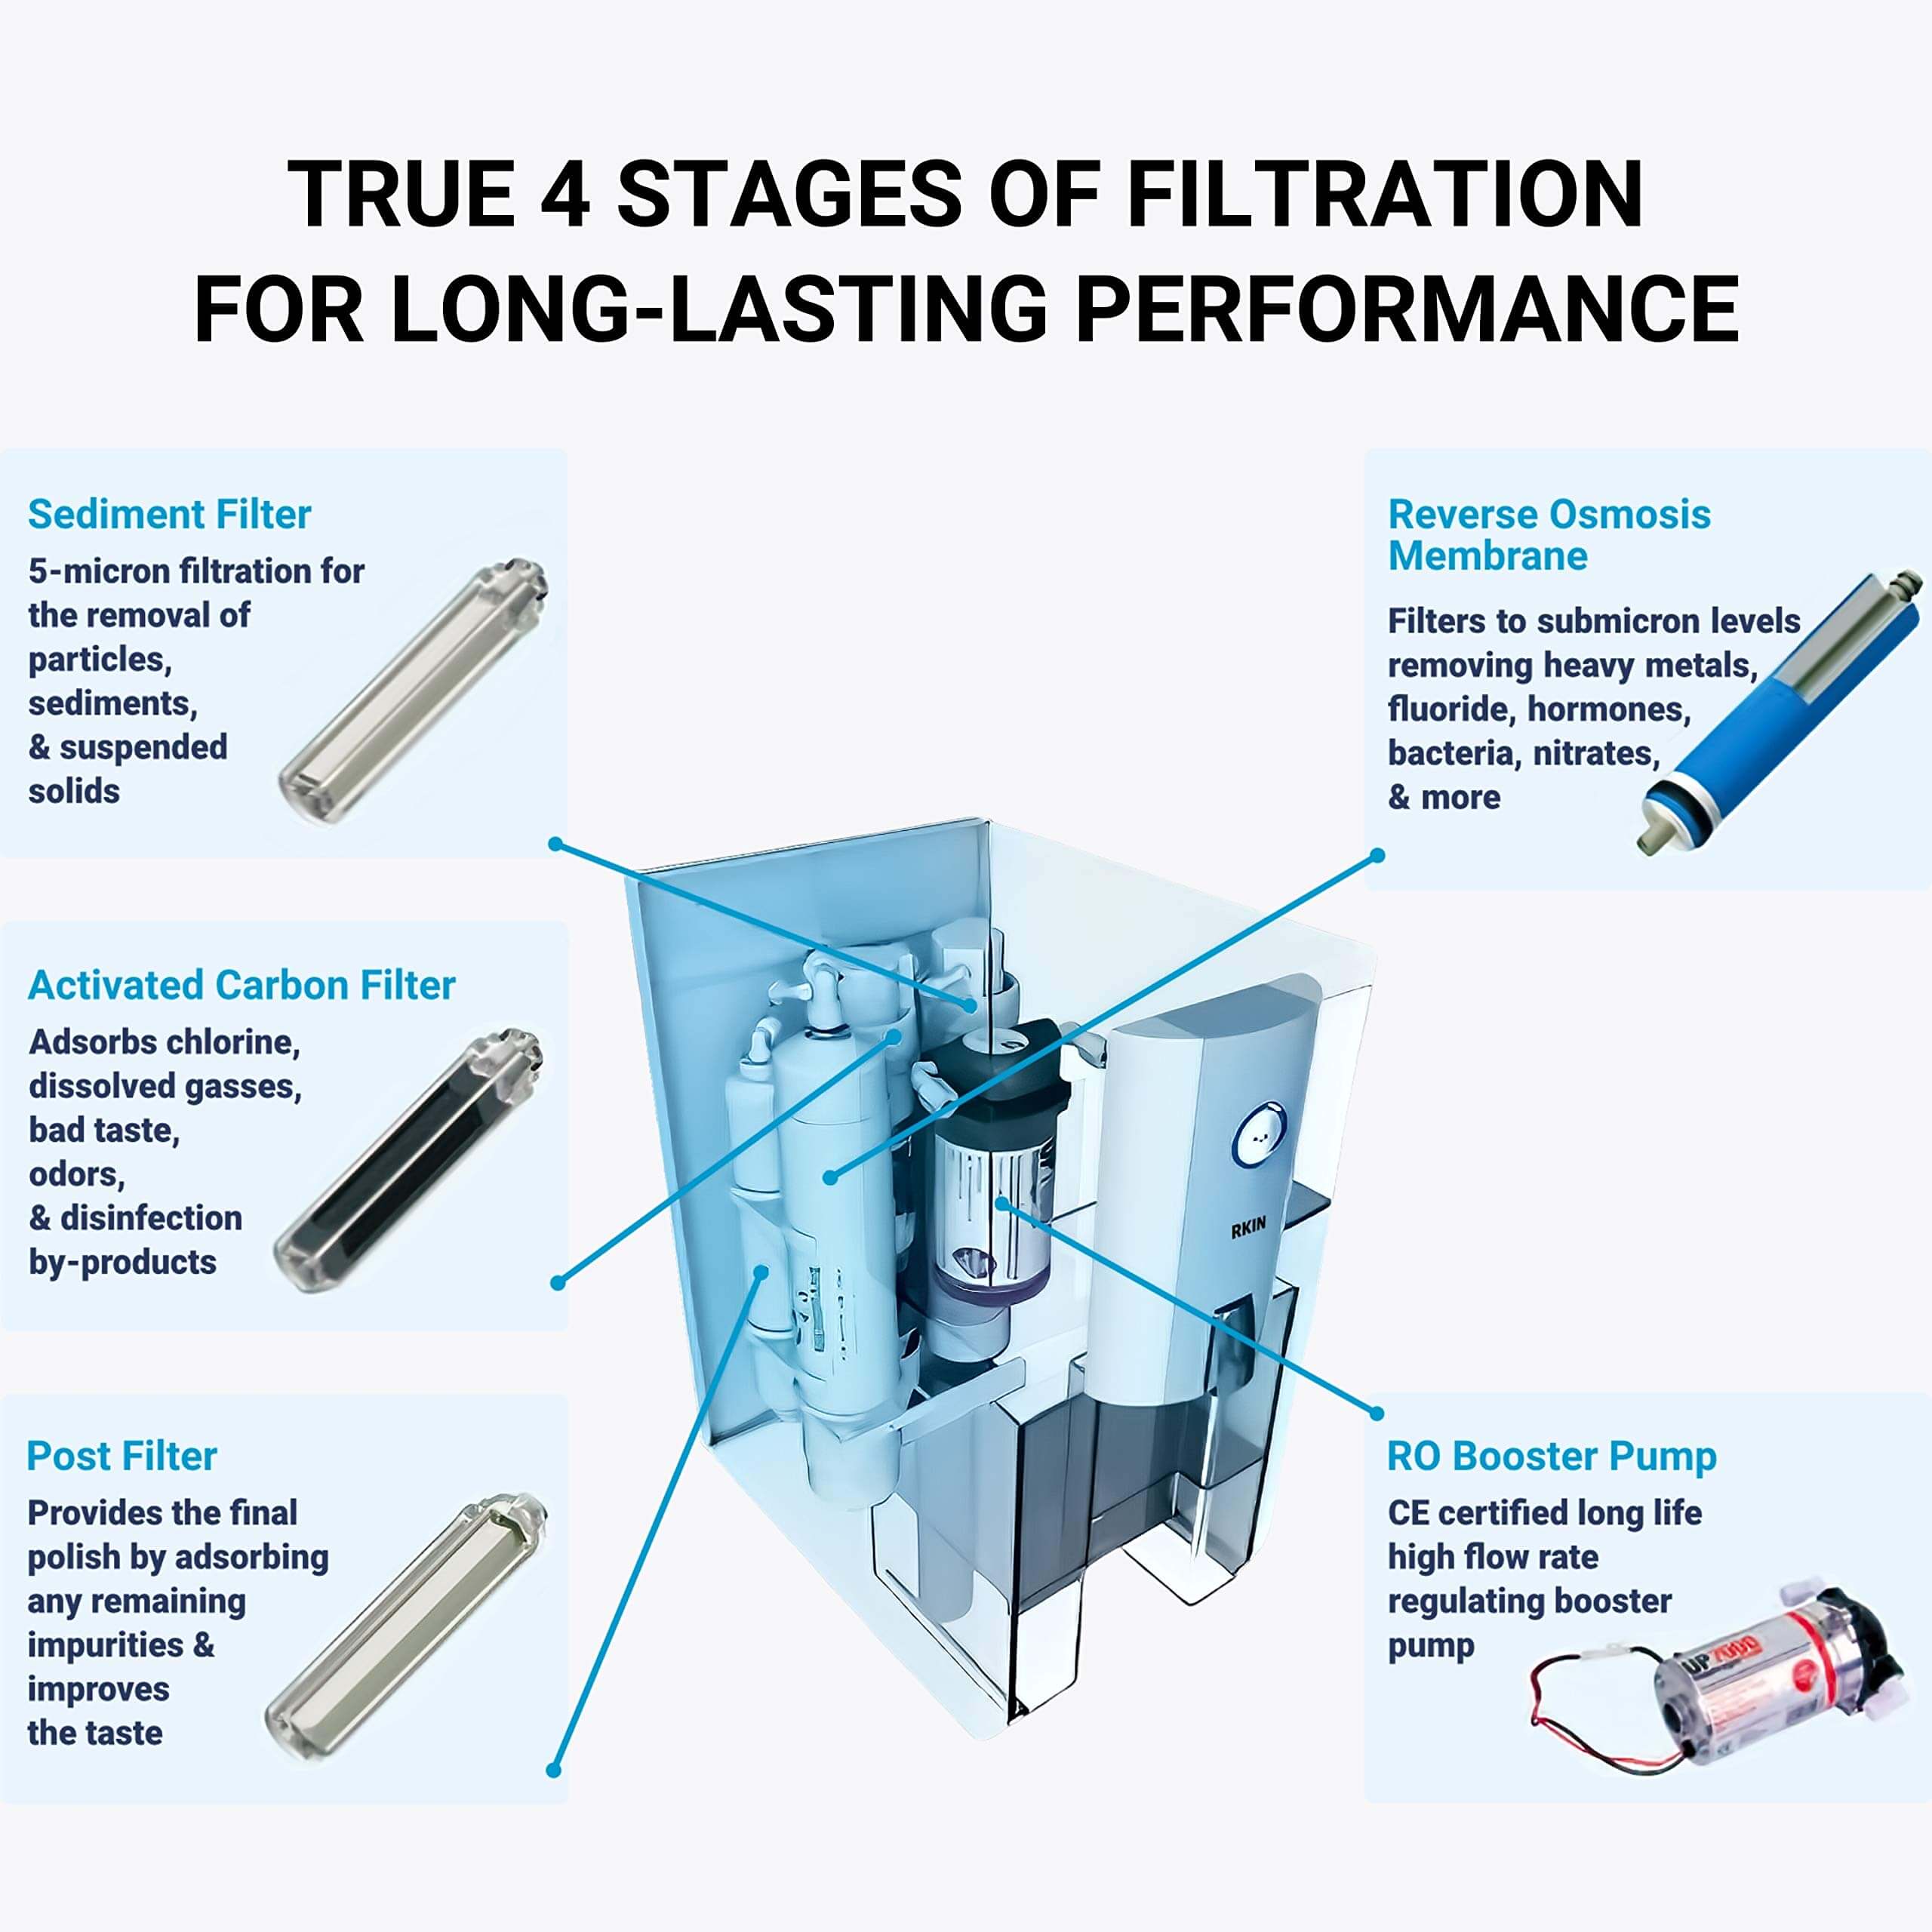 AlcaPure Zero Installation Purifier Reverse Osmosis Countertop Water Filter, reverse osmosis water filter countertop, countertop reverse osmosis water filter, the best water filter, best tap water filter, drinking water filtration system